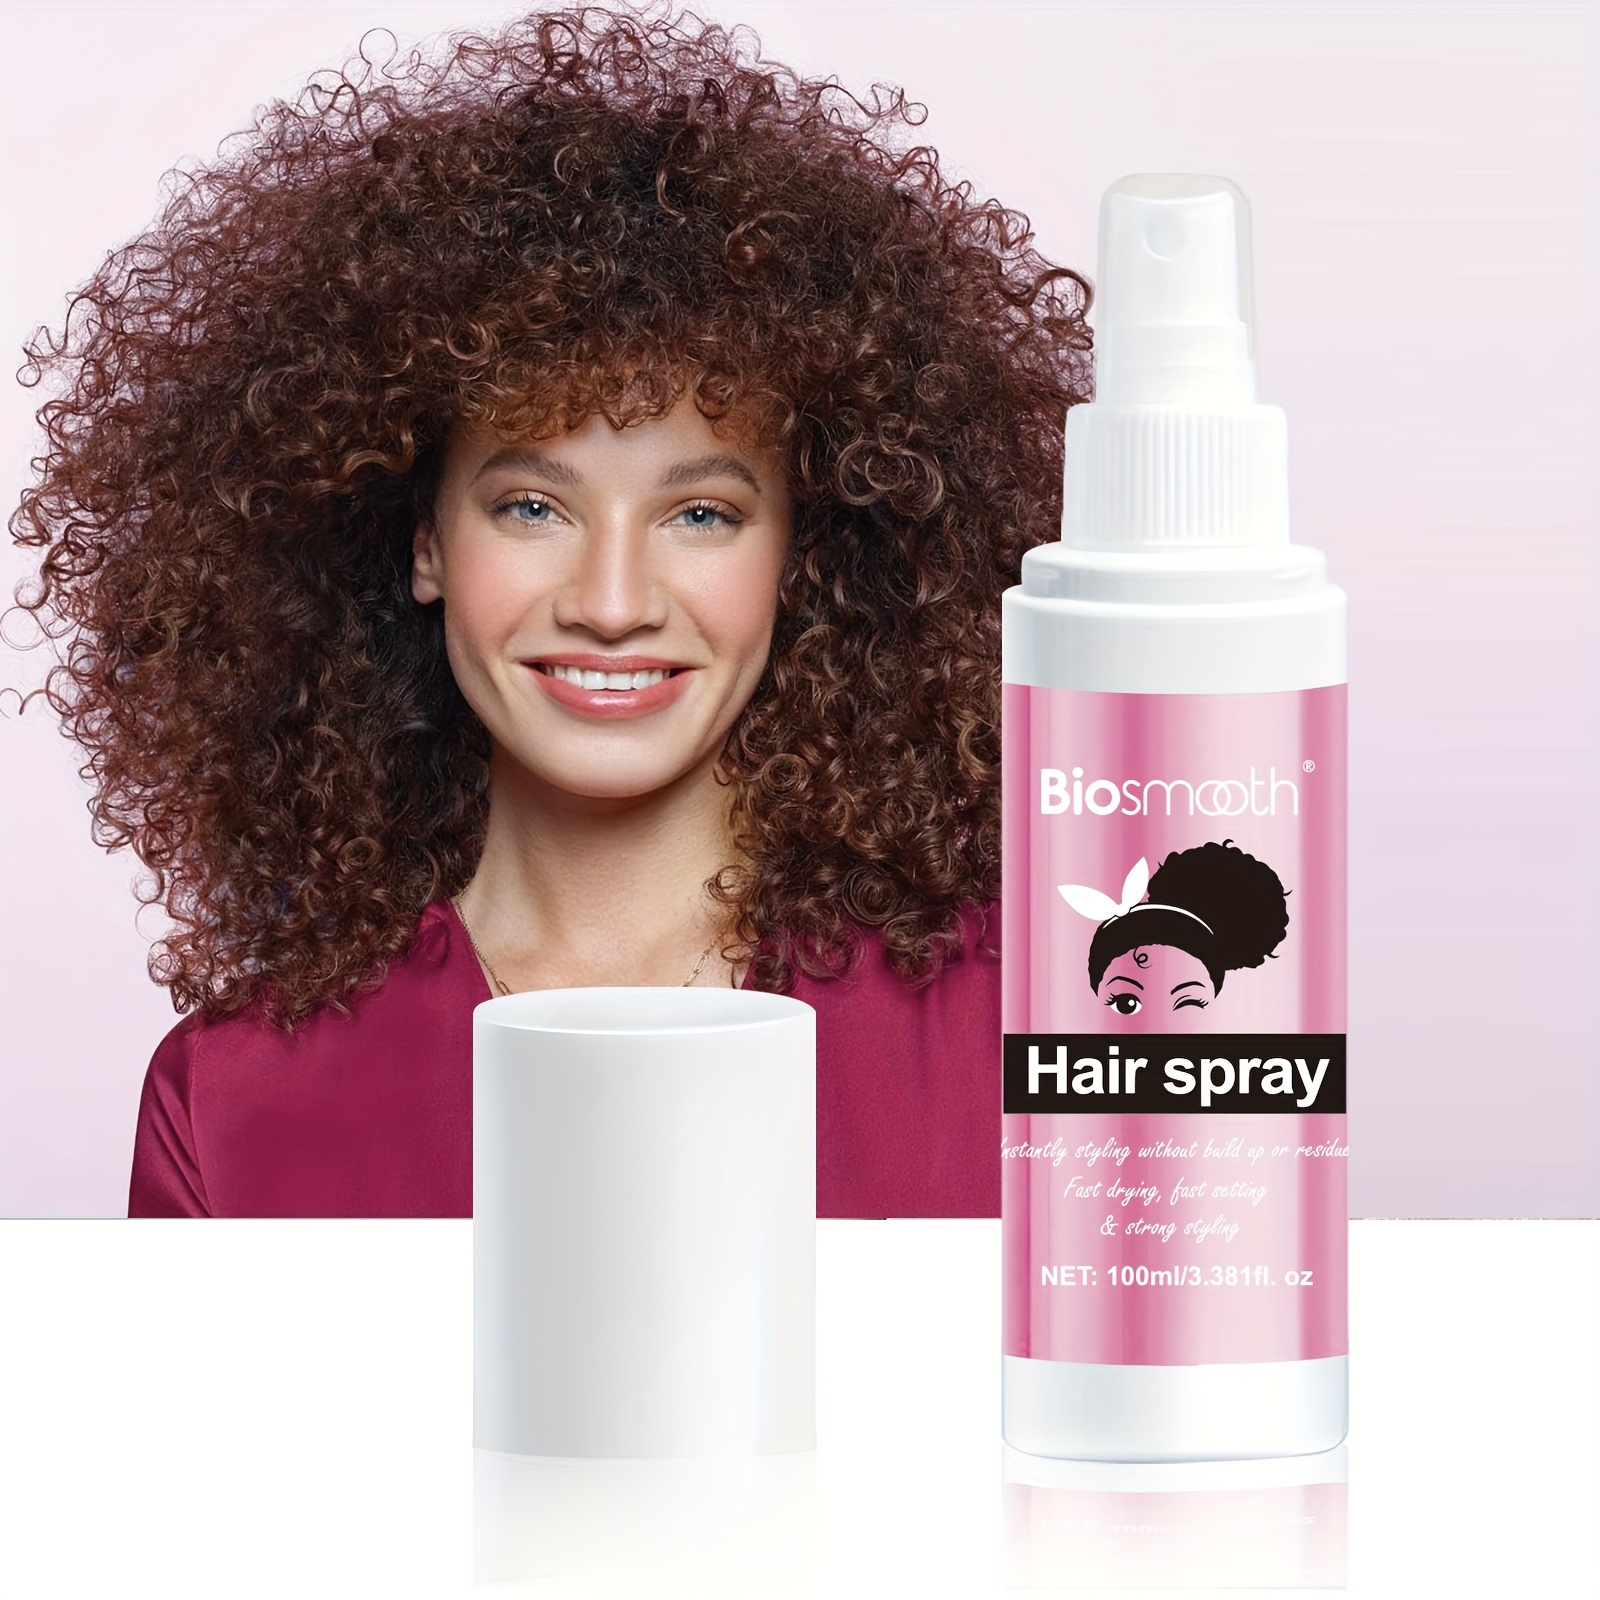 

100ml Hair Spray, Quick Styling With Lasting Hold, Fine Mist For All Hair Types